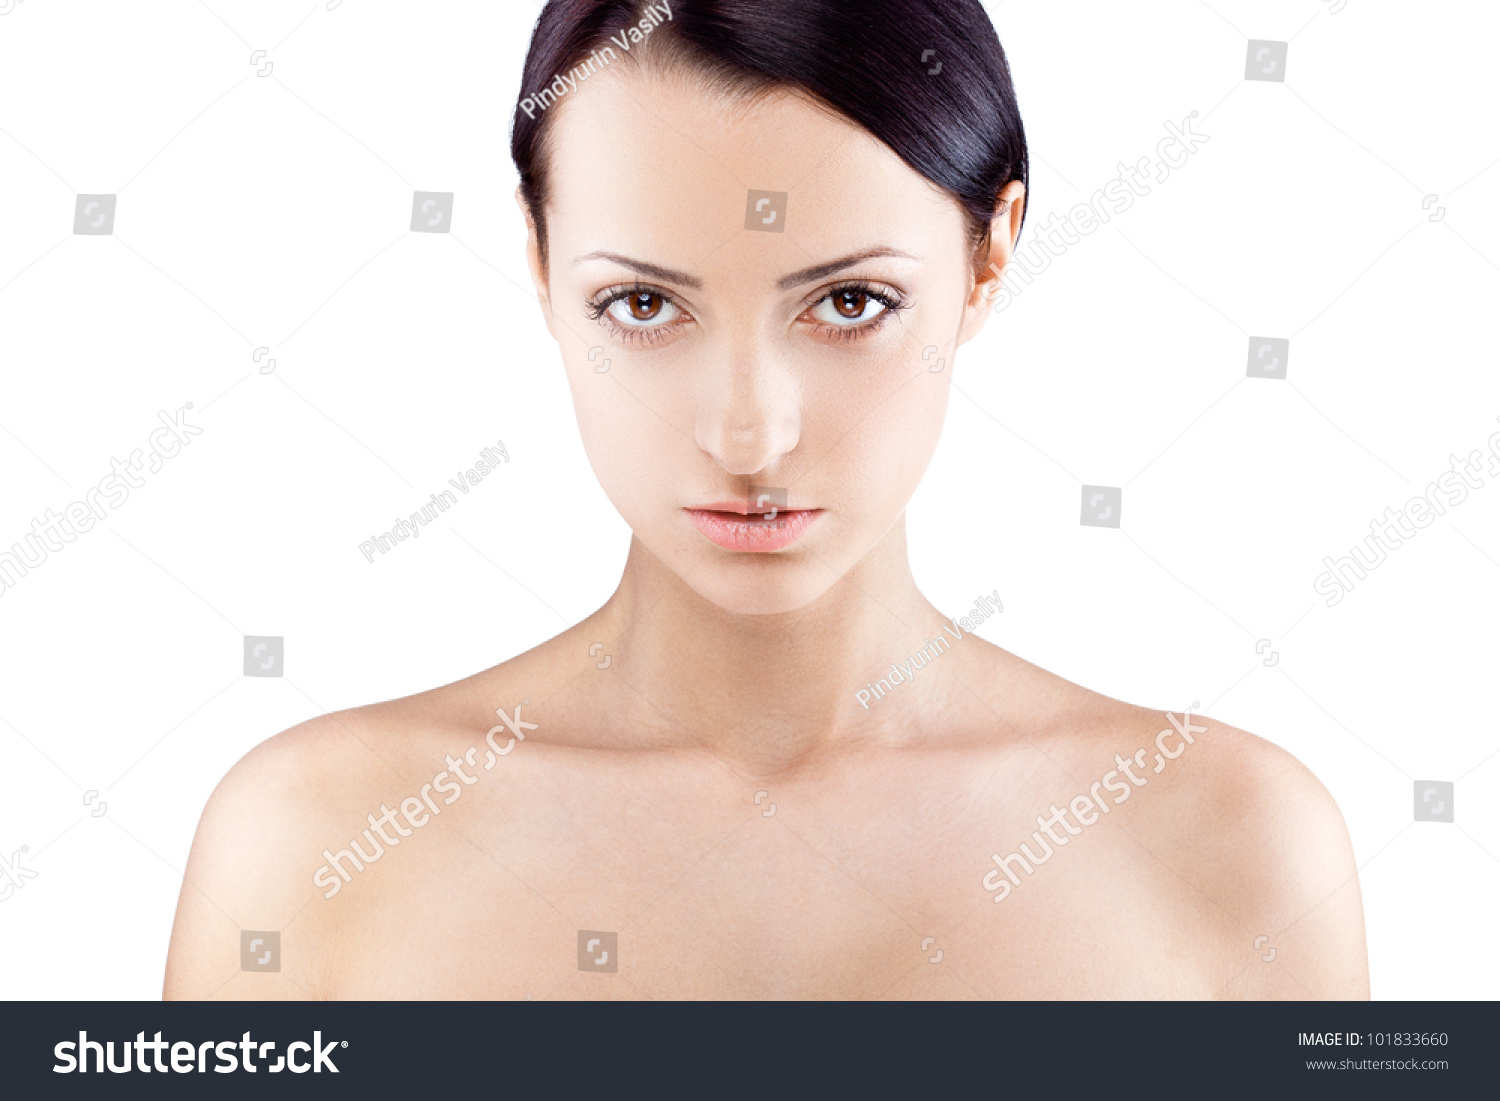 Casual healthy naked woman stock photo. Image of woman 